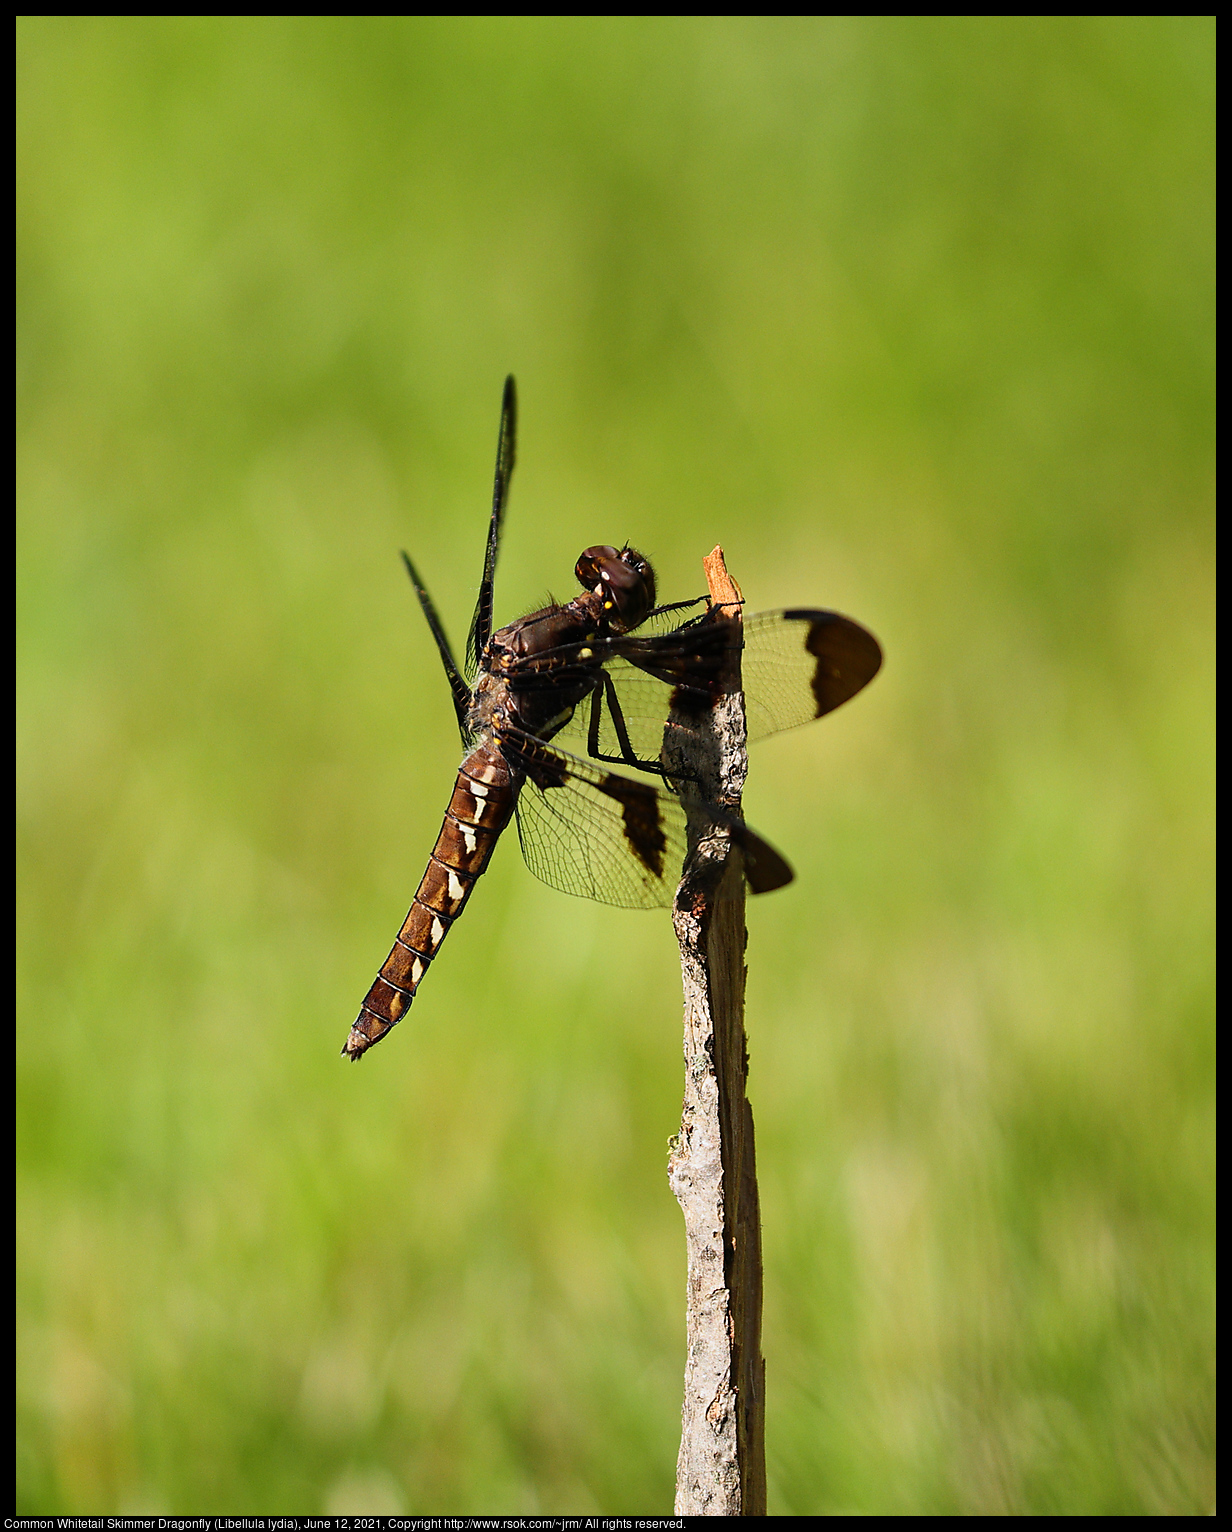 Common Whitetail Skimmer Dragonfly (Libellula lydia), June 12, 2021